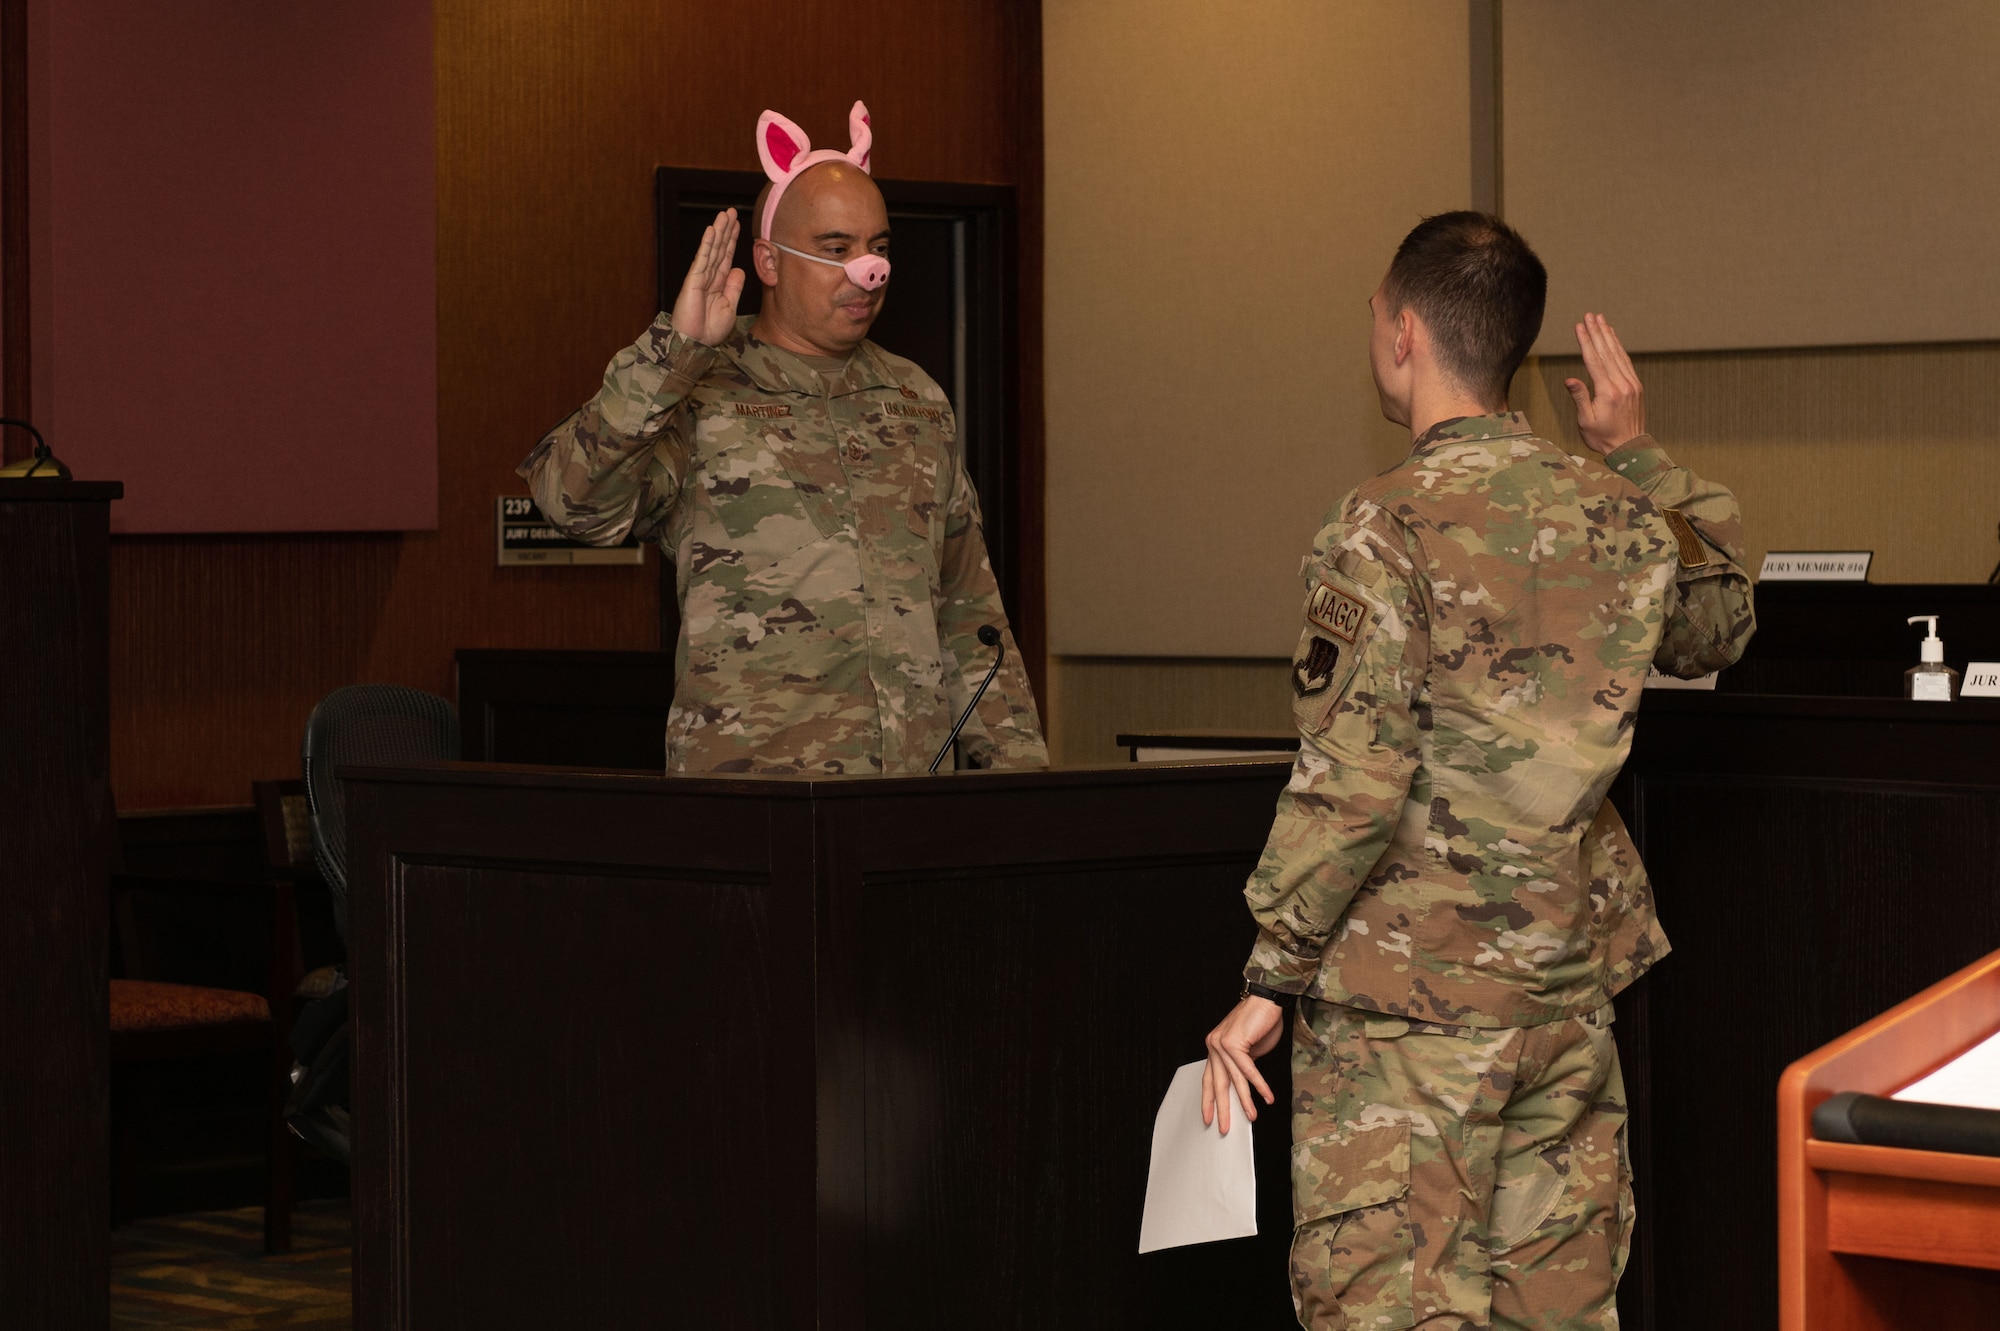 Chief Master Sgt. Peter Martinez, left, 4th Fighter Wing command chief, portrays Pig One, as 1st Lt. Oliver Batkoff, 4th FW JA legal assistant, swears an oath on the stand for direct examination during a “Big Bad Wolf” fairy tale themed mock trial at Seymour Johnson Air Force Base, North Carolina, May 1, 2023. A direct examination is when a witness is questioned to get their version of the story. The event was held as a part of Law Day to help teach students from Carver Heights Elementary School, Goldsboro, North Carolina, about Air Force’s legal profession. Community outreach events help the wing build relations with local communities and is an opportunity for Airmen to mentor future leaders. (U.S. Air Force photo by Airman 1st Class Rebecca Sirimarco-Lang)